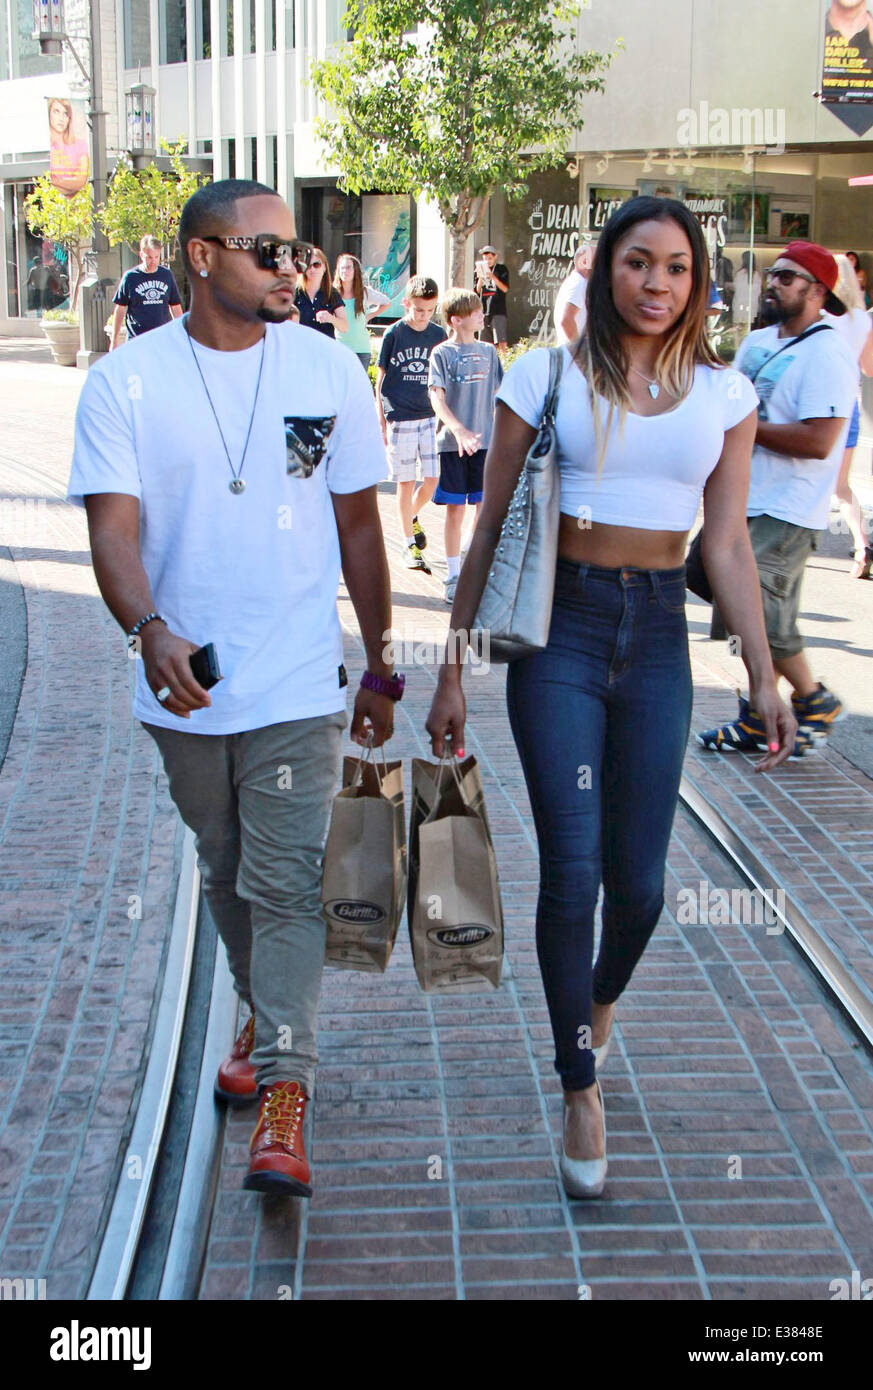 ufravigelige attribut ale WWE' diva Cameron seen with a male companion shopping at The Grove  Featuring: Cameron,Ariane Andrew Where: Los Angeles, CA, Un Stock Photo -  Alamy